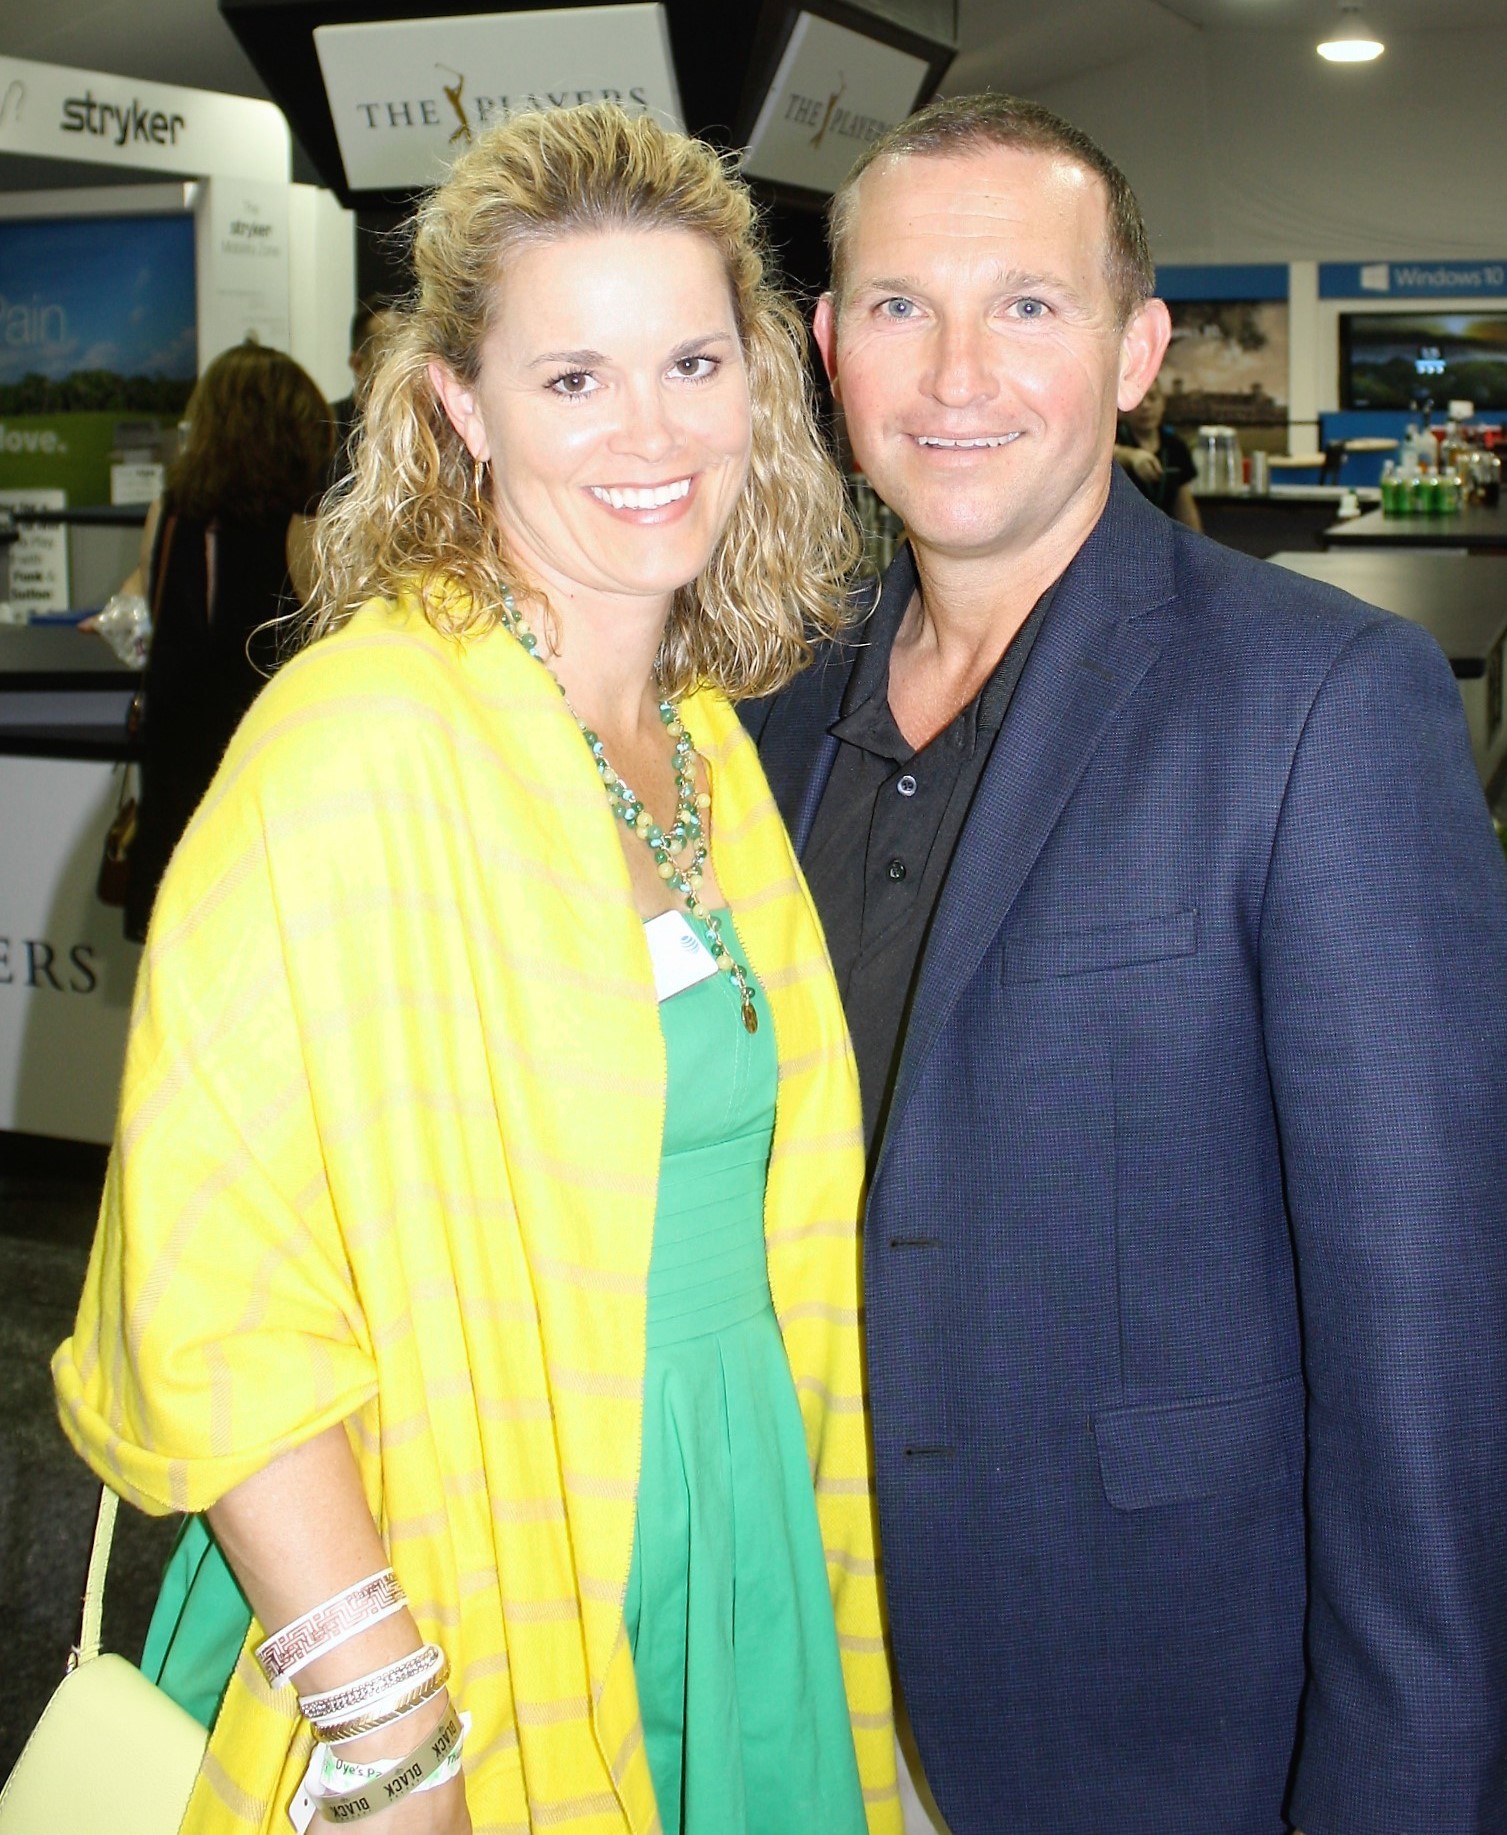 Jacksonville Mayor Lenny Curry and wife Molly